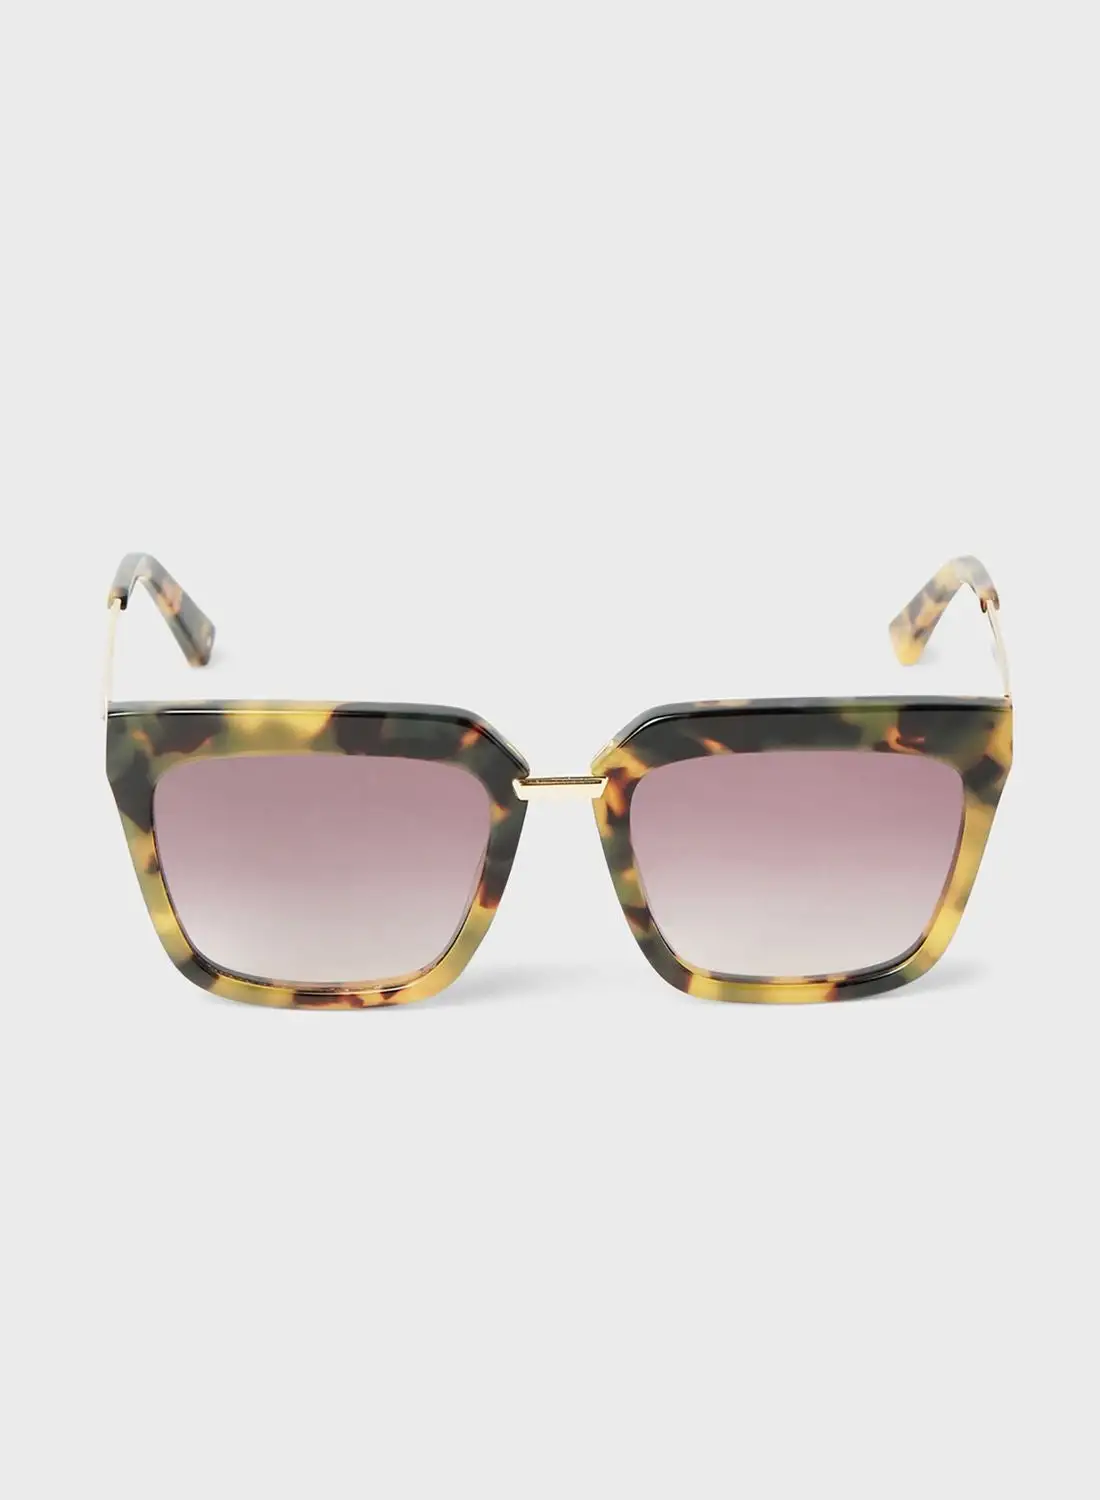 KENDALL + KYLIE Oversized Square Sunglasses